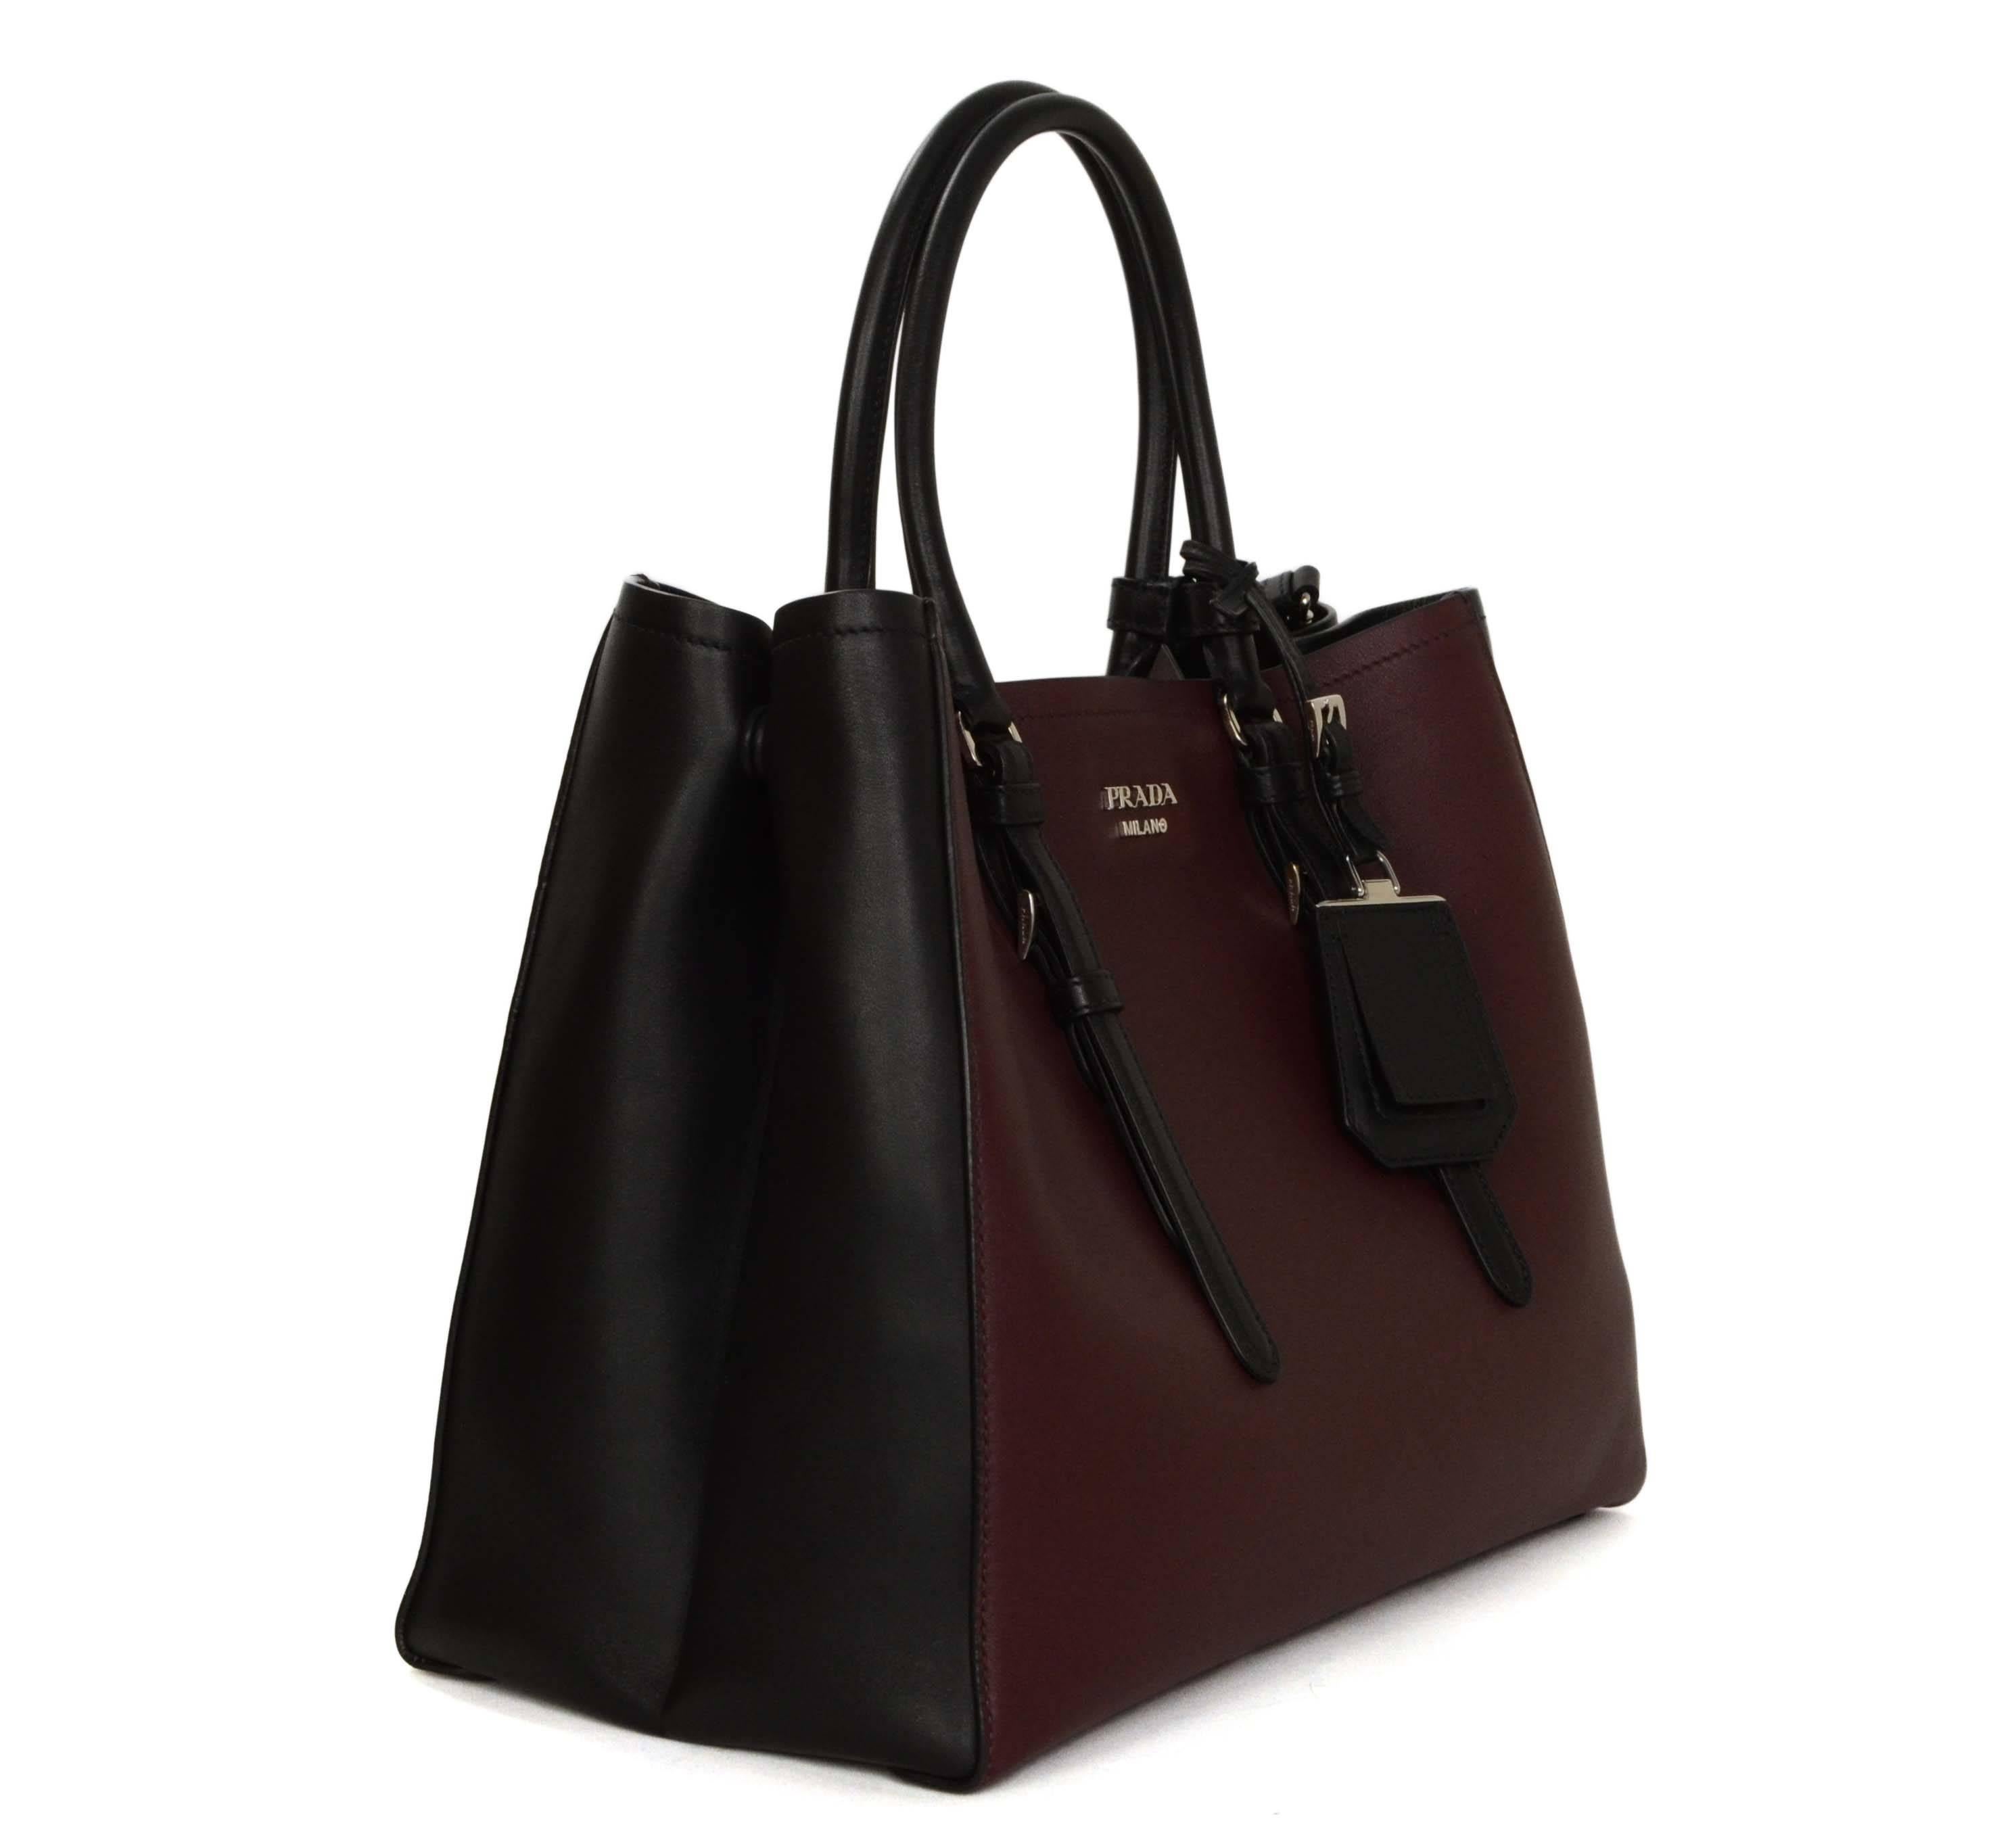 Prada '15 Black & Burgundy Calfskin City Double Tote
Features expandable sides and optional shoulder strap
Made In: Italy
Color: Burgundy and black
Hardware: Silvertone
Materials: Leather
Lining: Black leather
Closure/Opening: Open